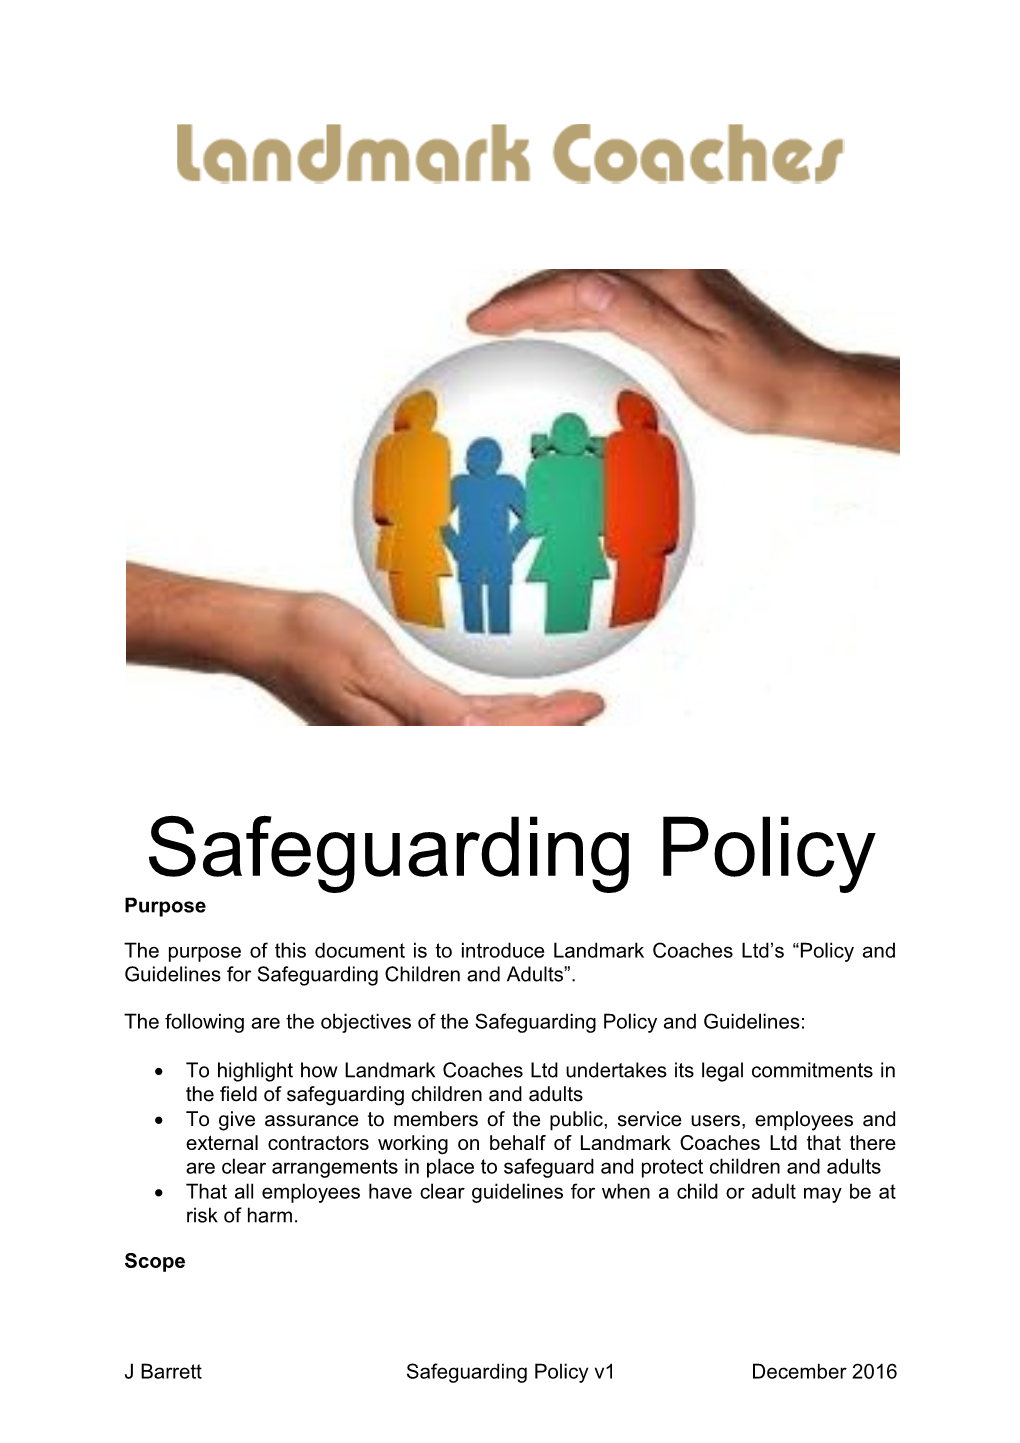 The Following Are the Objectives of the Safeguarding Policy and Guidelines